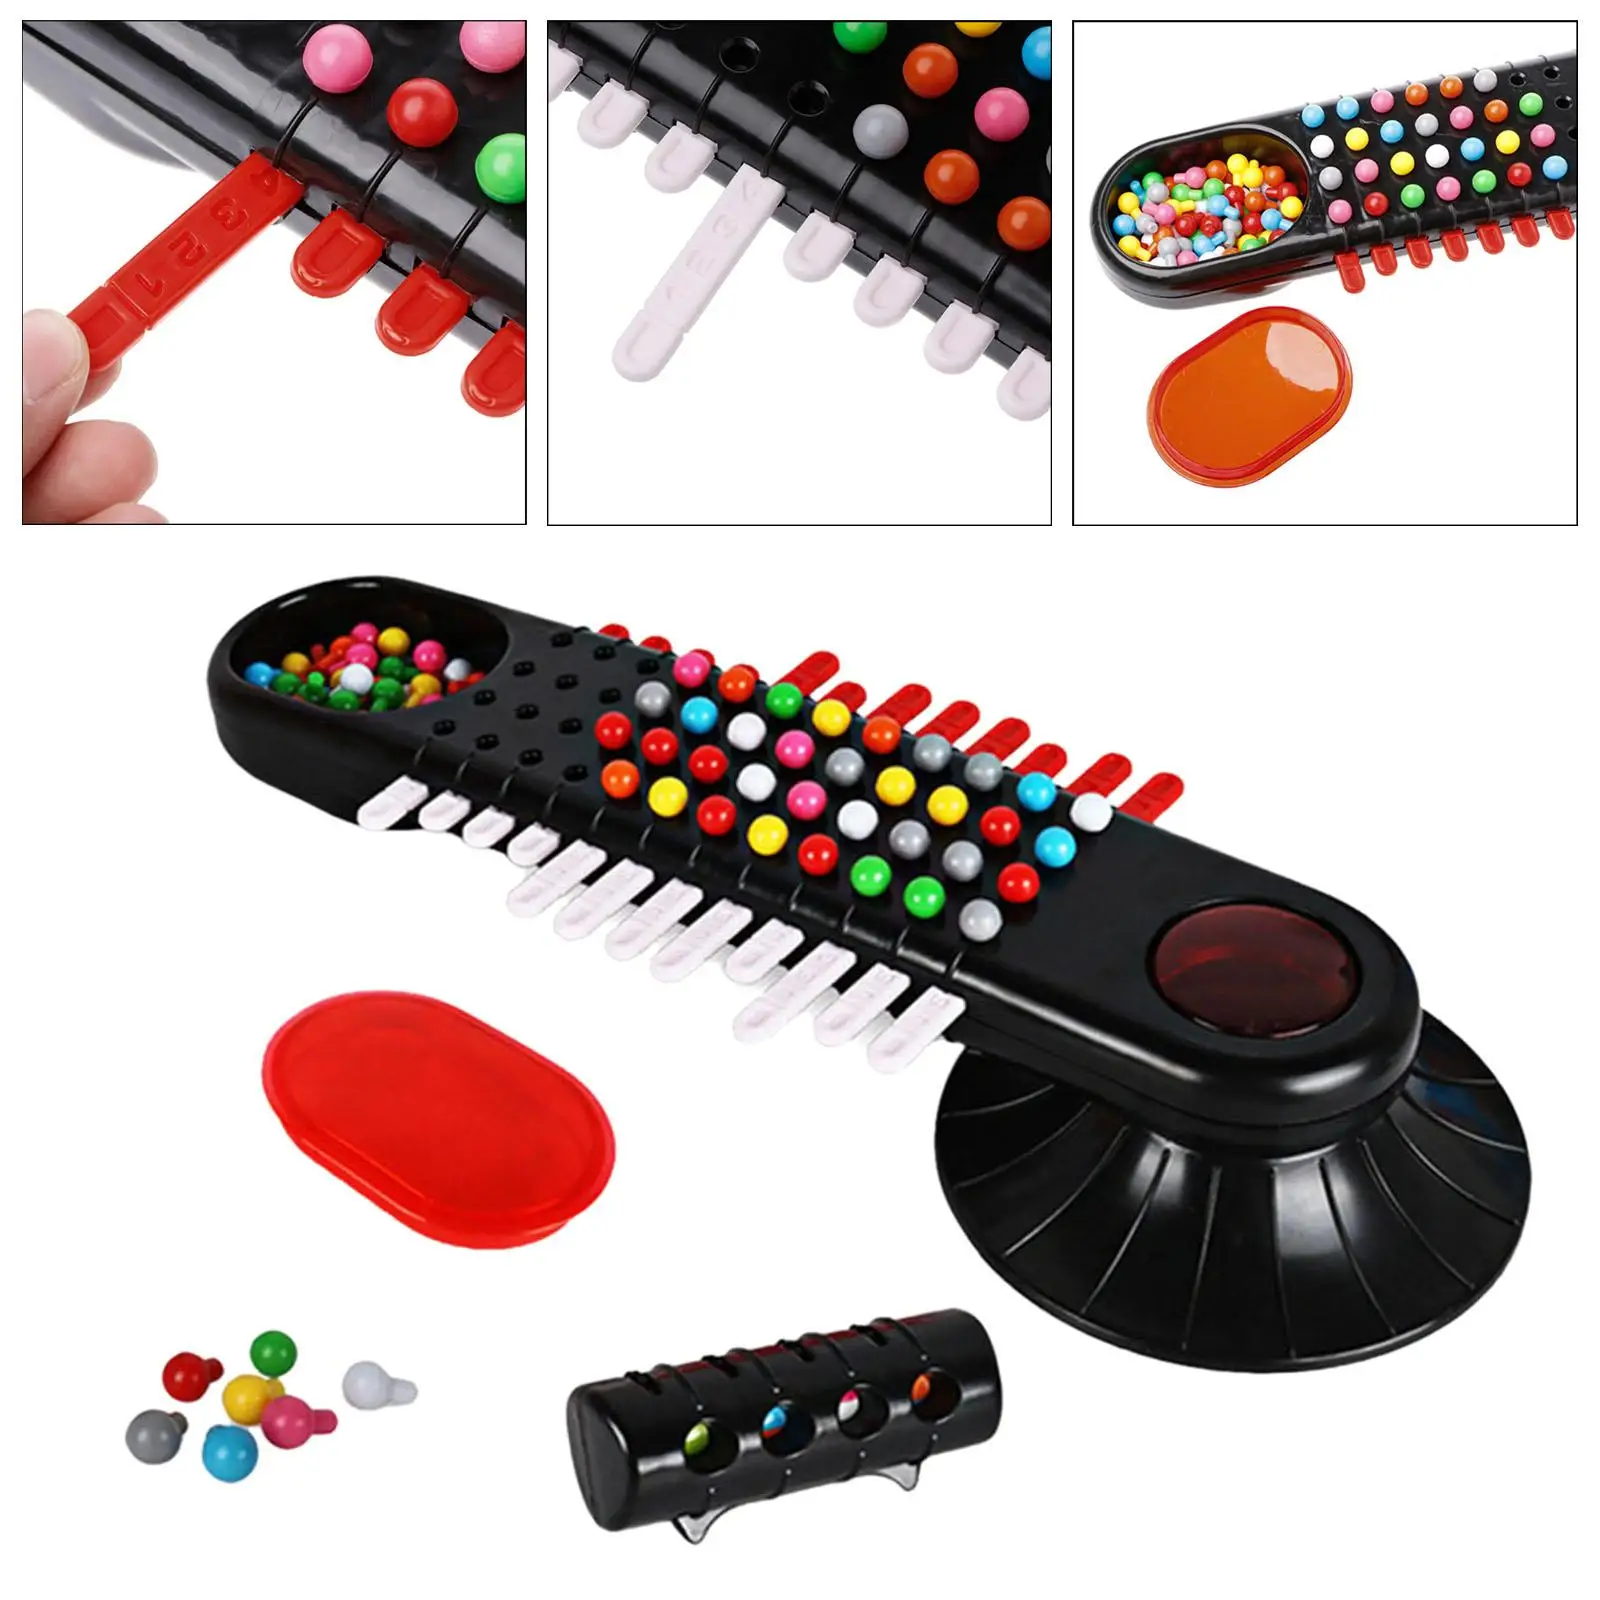 Code Cracking Bead Game Codebreaker Game Logic Thicking Educational Password Toy for Kids Children Traveling Family Fun Dorm